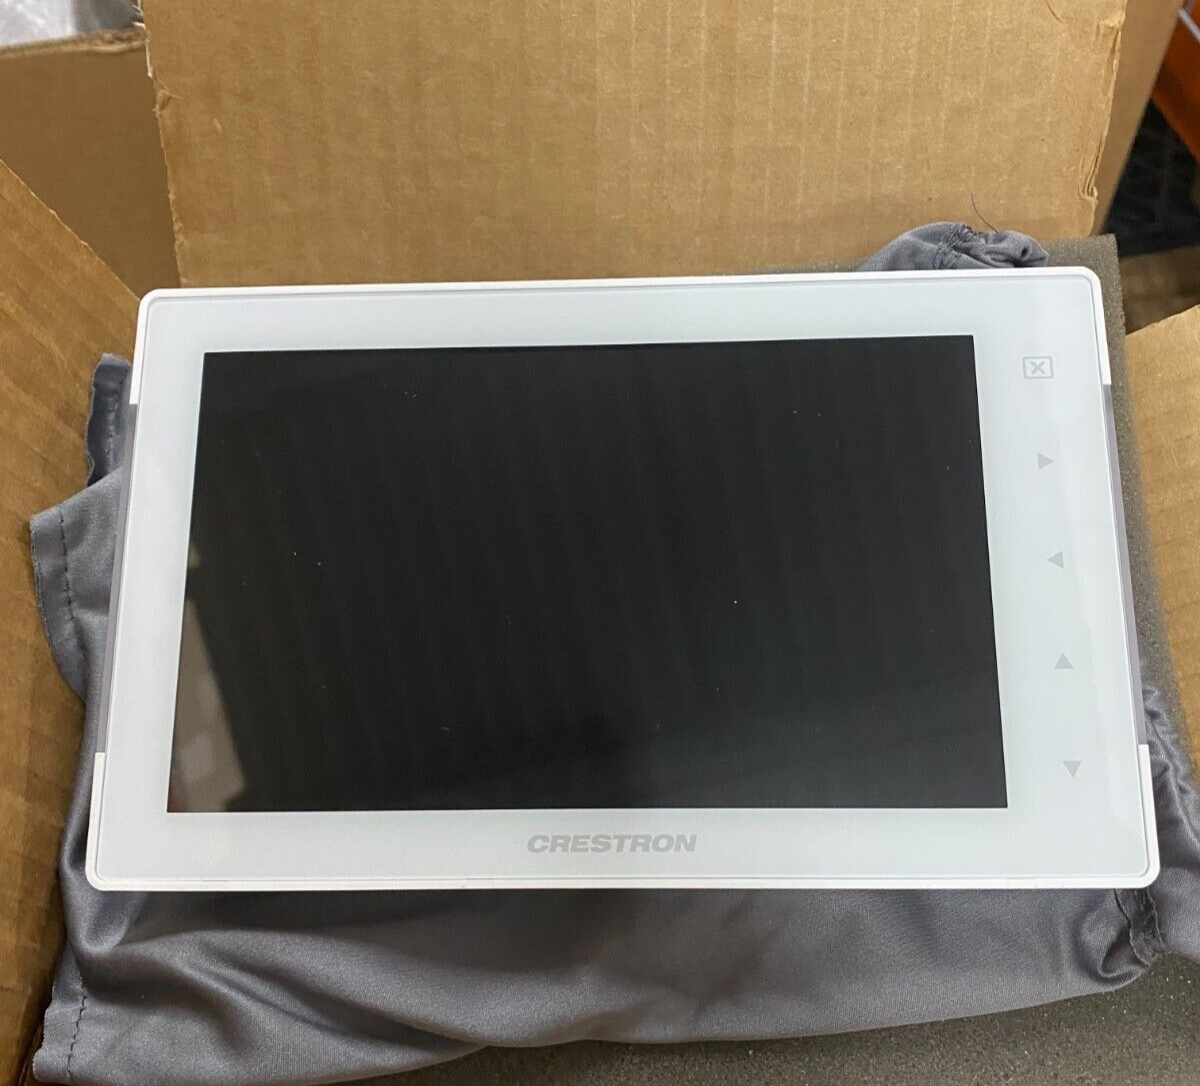 Crestron TSS-752-W-S 7" Touch Screen Control Panel White 6506388